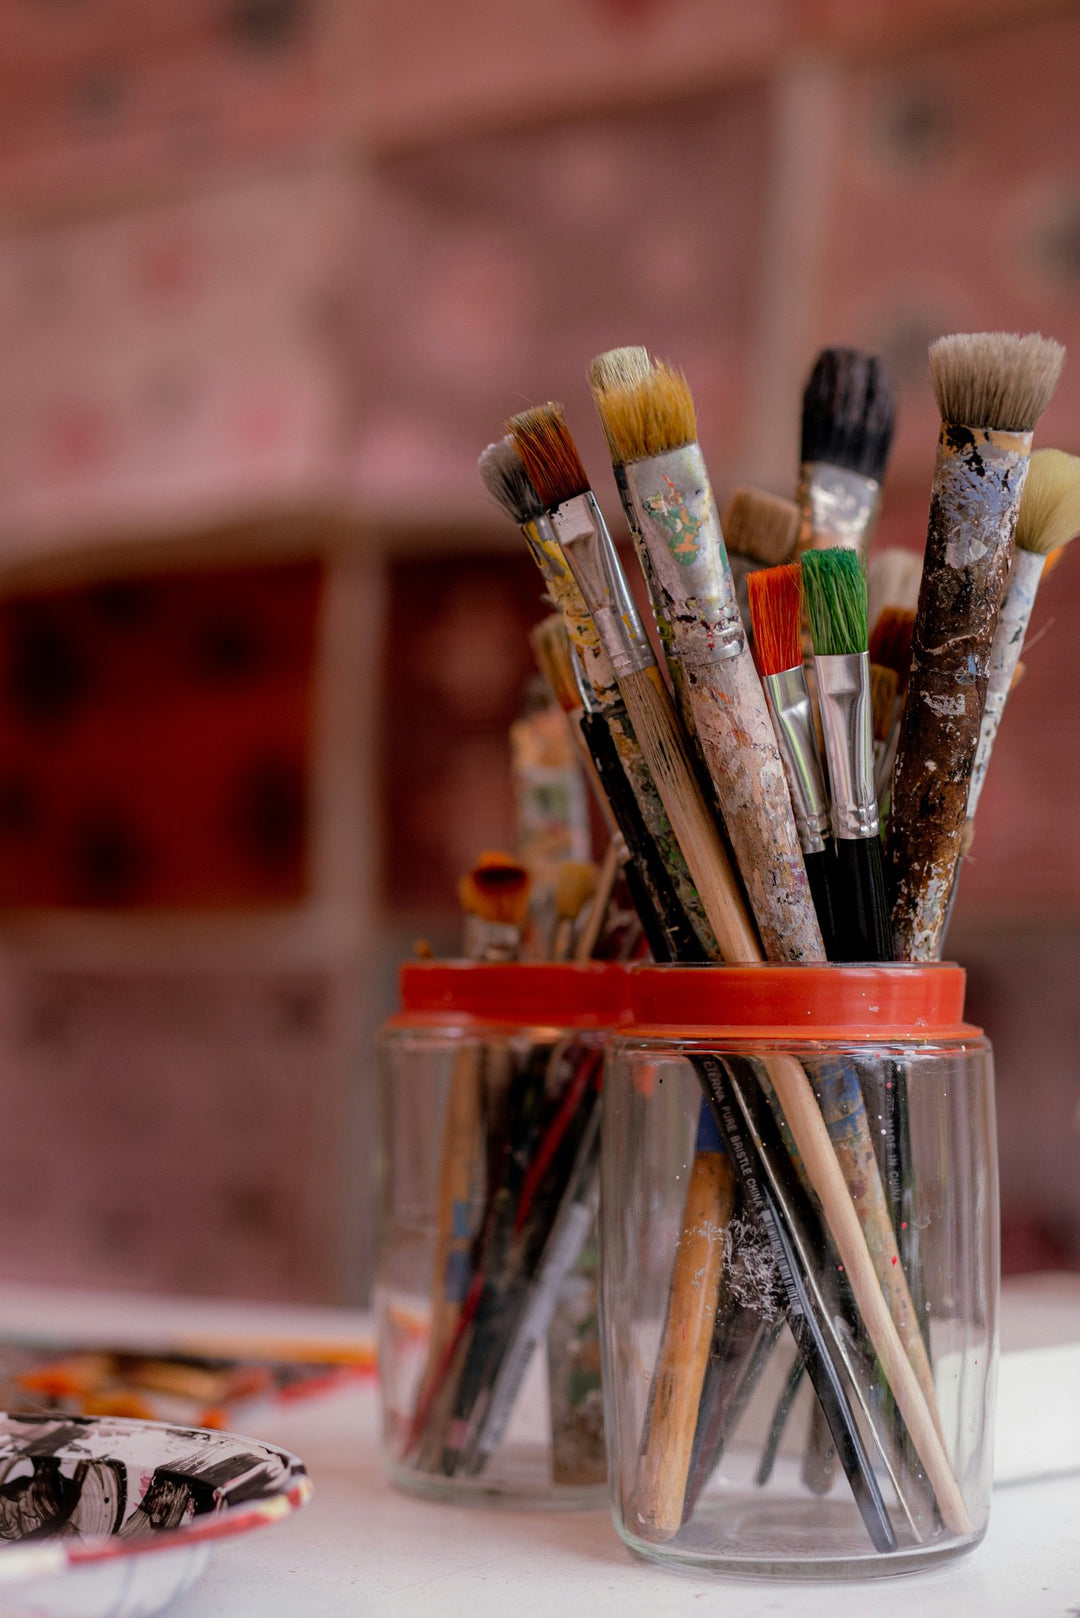 Are Paint and Sip events suitable for children?